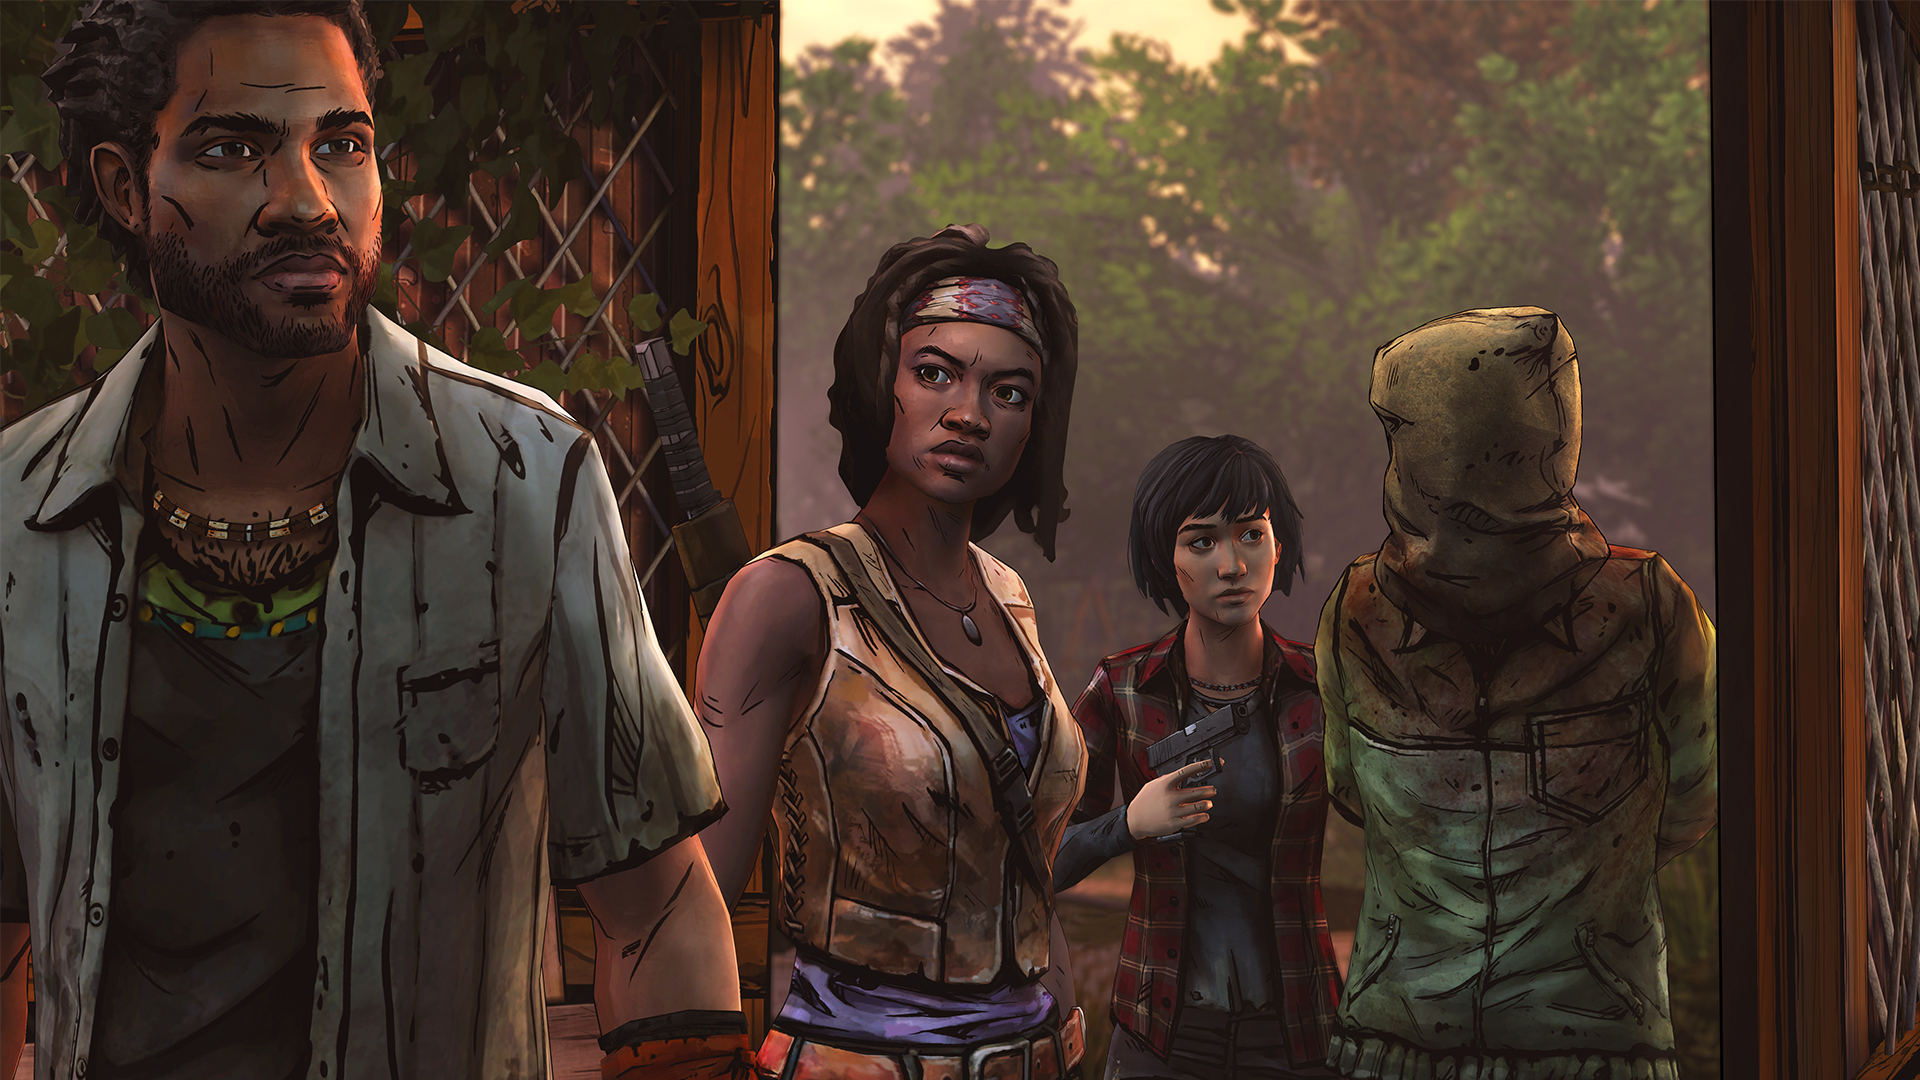 Last Episode of “The Walking Dead: Michonne” Revealed - How Will Michonne's End? That's (Mostly) Up to You